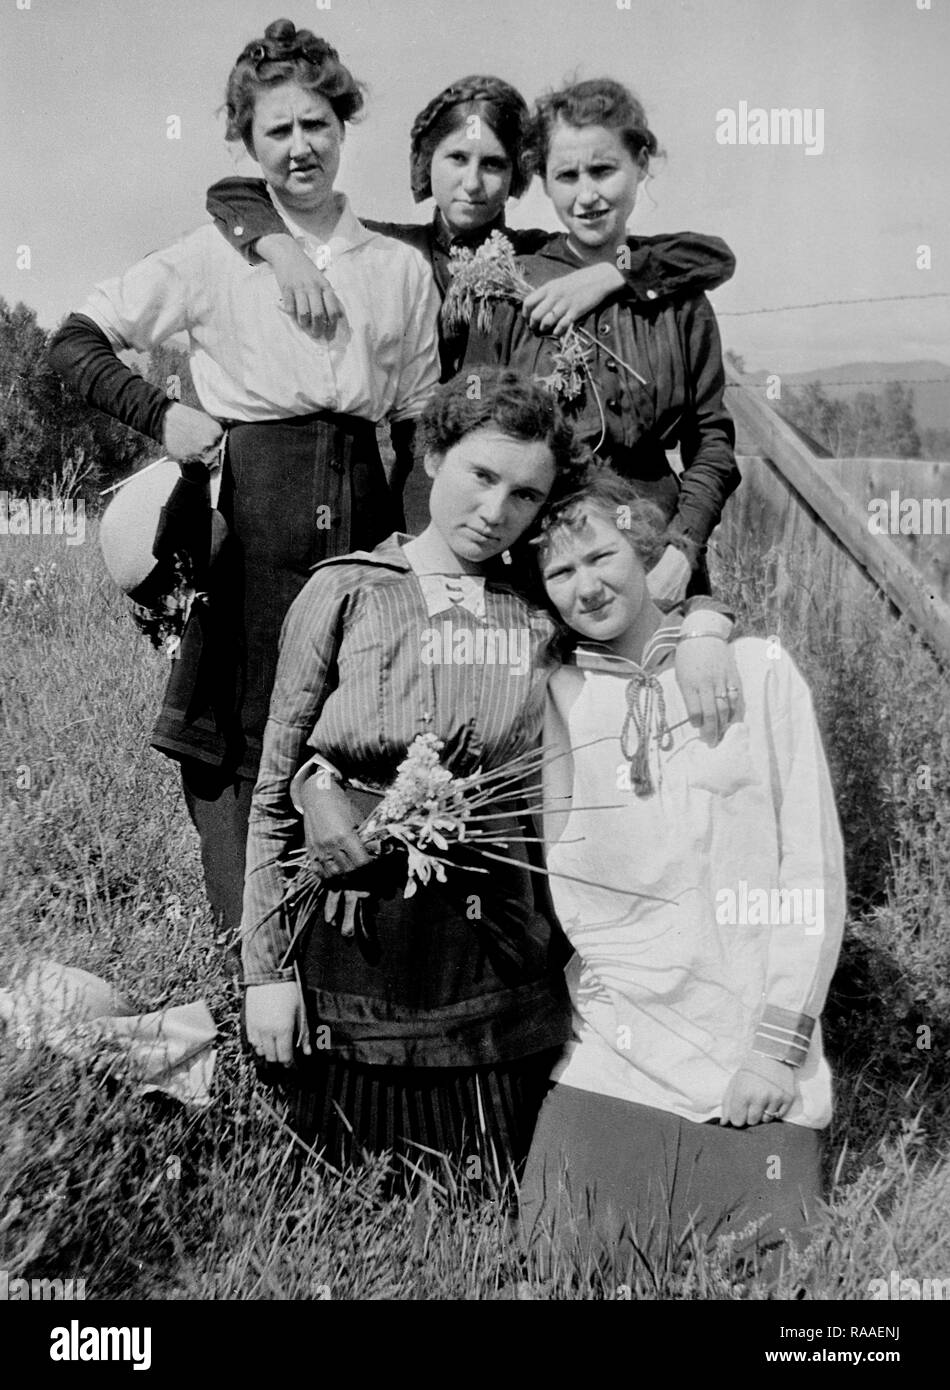 Five  young women pose together in a Colorado field, ca. 1928. Stock Photo